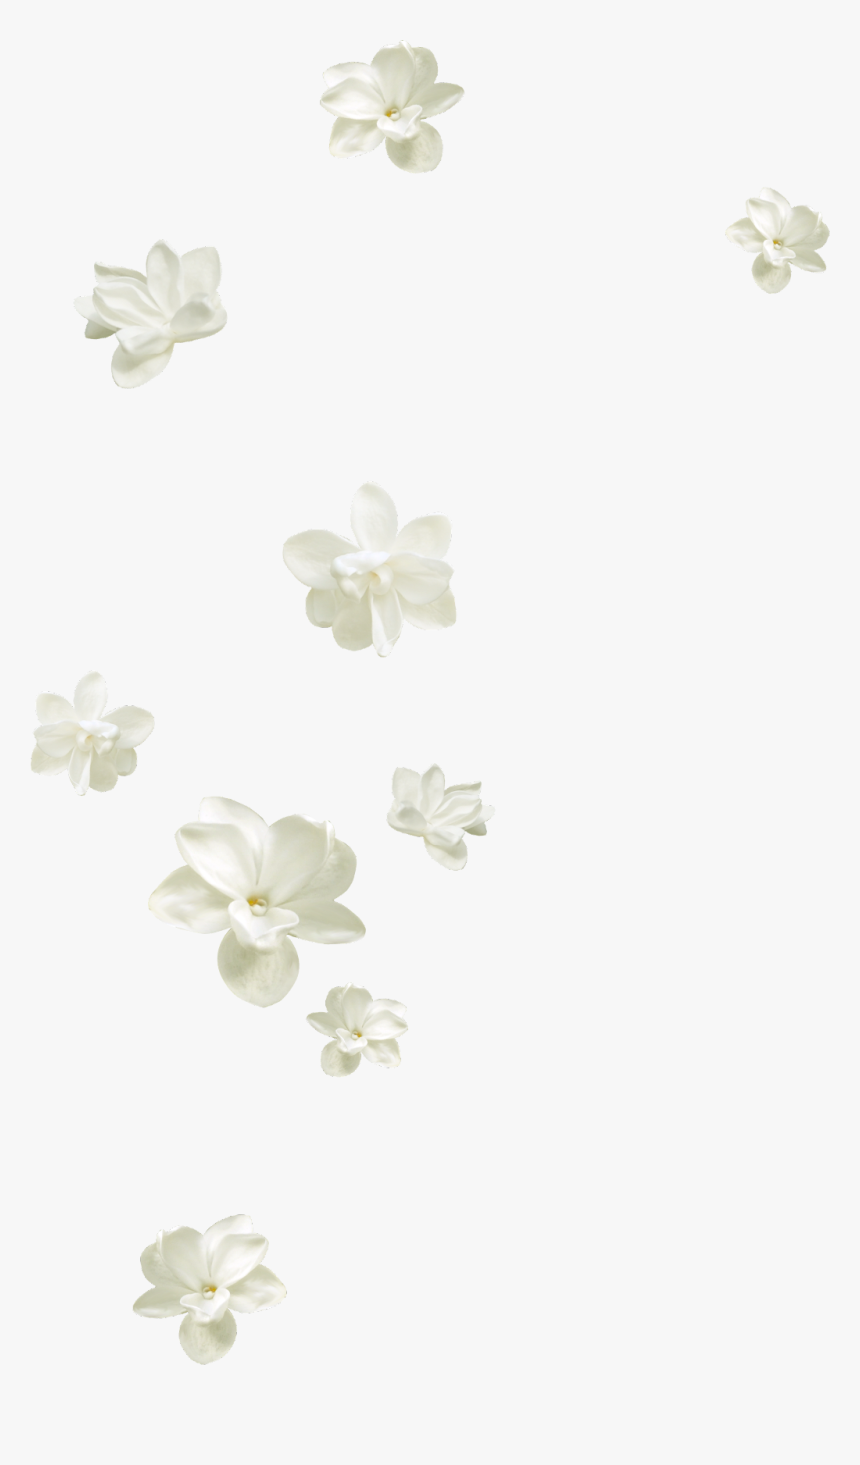 #mq #white #flowers #flower #garden #nature #falling - Jasmine, HD Png Download, Free Download